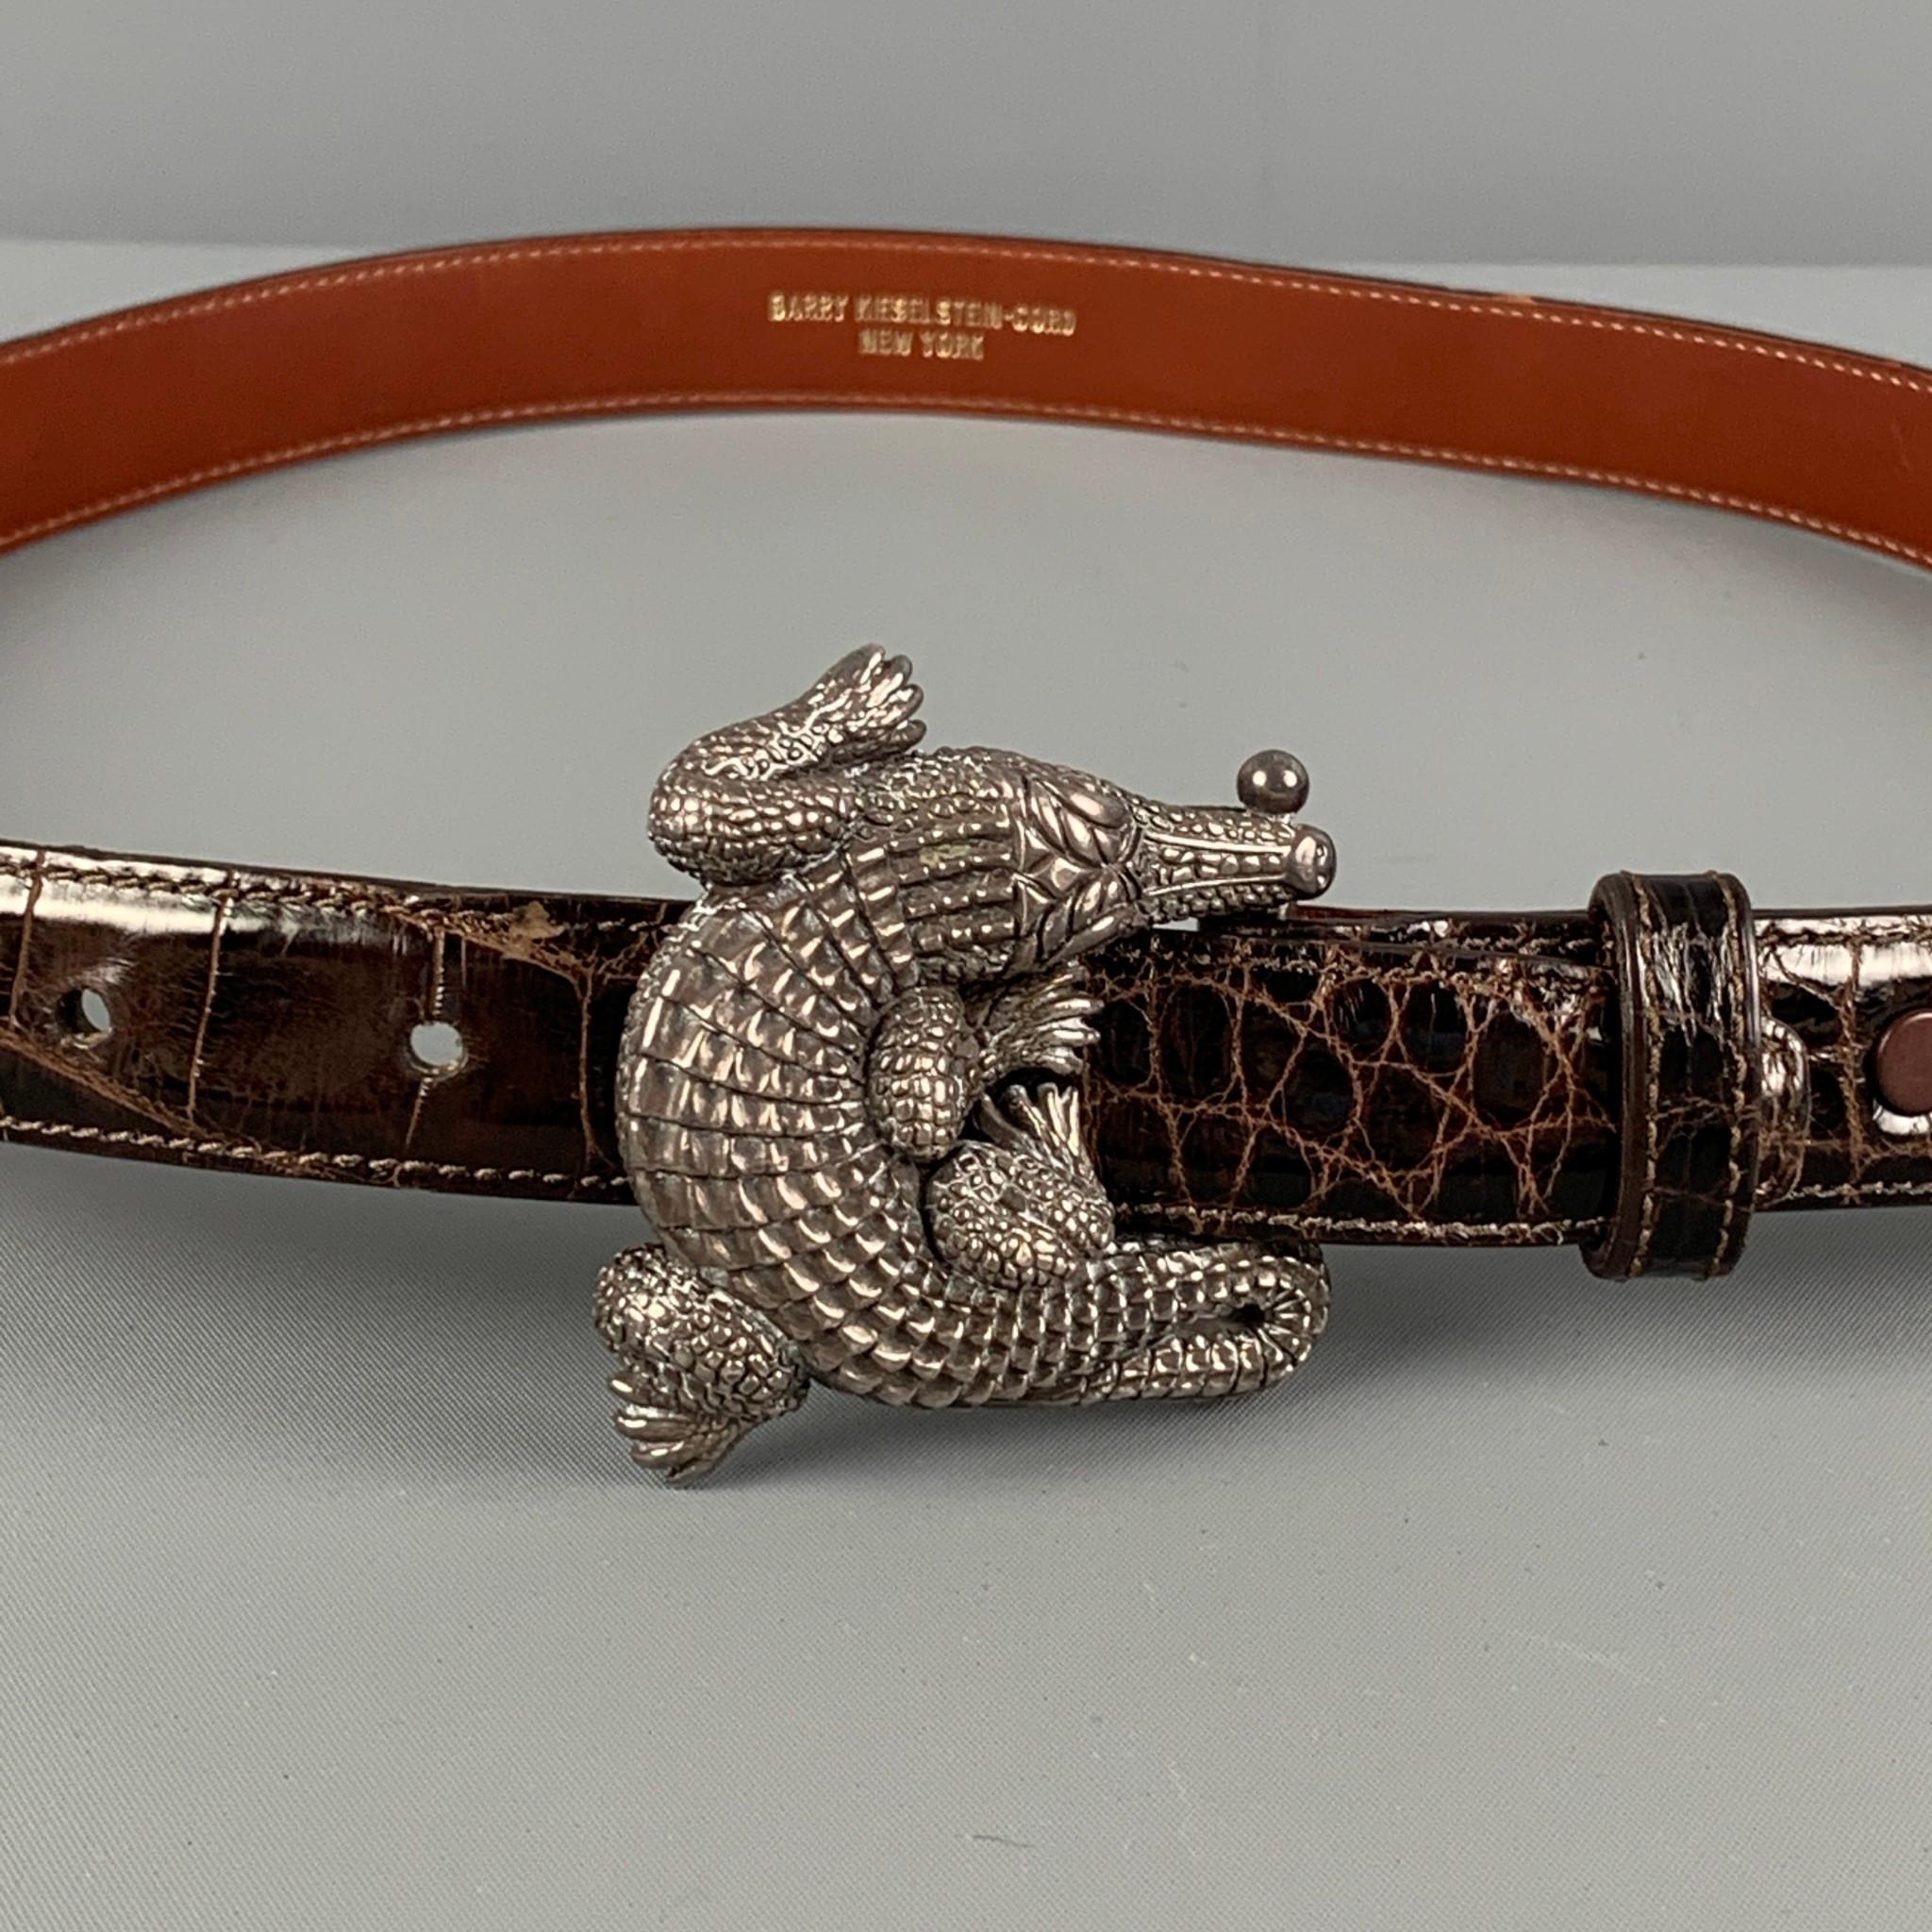 Vintage BARRY KIESELSTEIN-CORD 1995 belt comes in a brown alligator leather featuring a sterling silver alligator buckle. 

Very Good Pre-Owned Condition.
Marked: 2

Length: 35 in.
Width: 0.75 in.
Min Length: 28 in.
Max Length: 32 in.
Buckle Length: